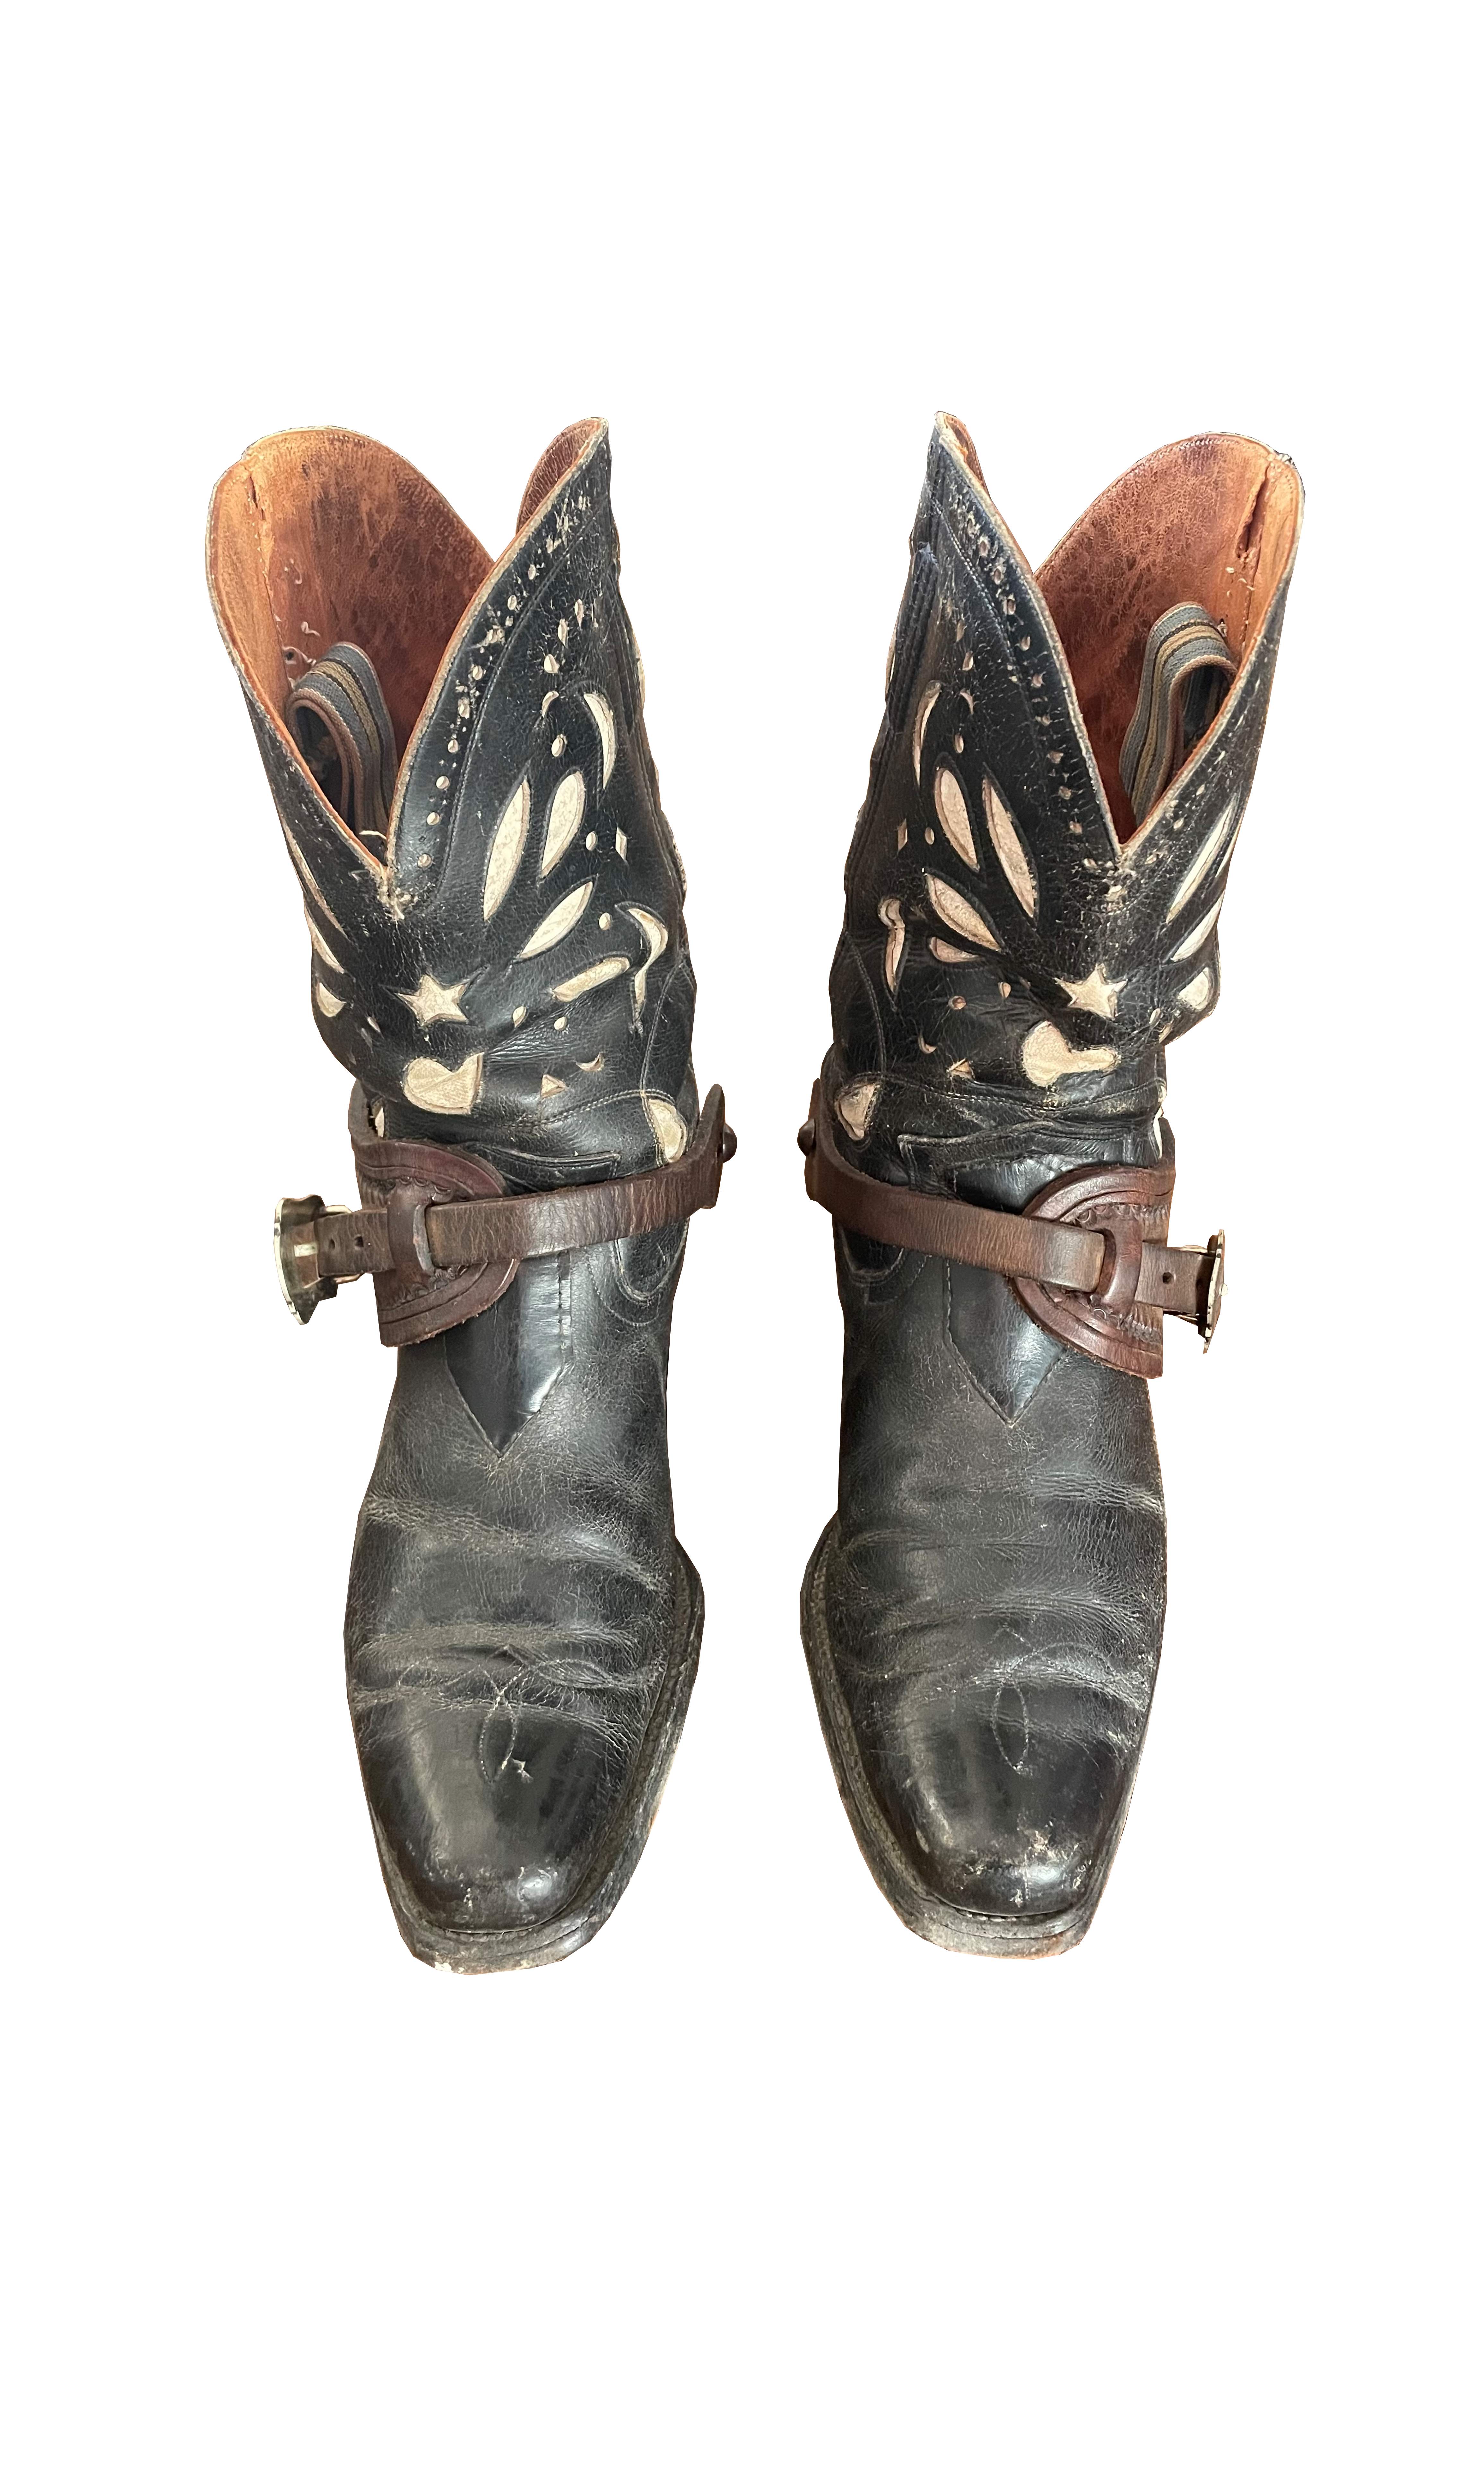 Old Cowboy Boots with inlays